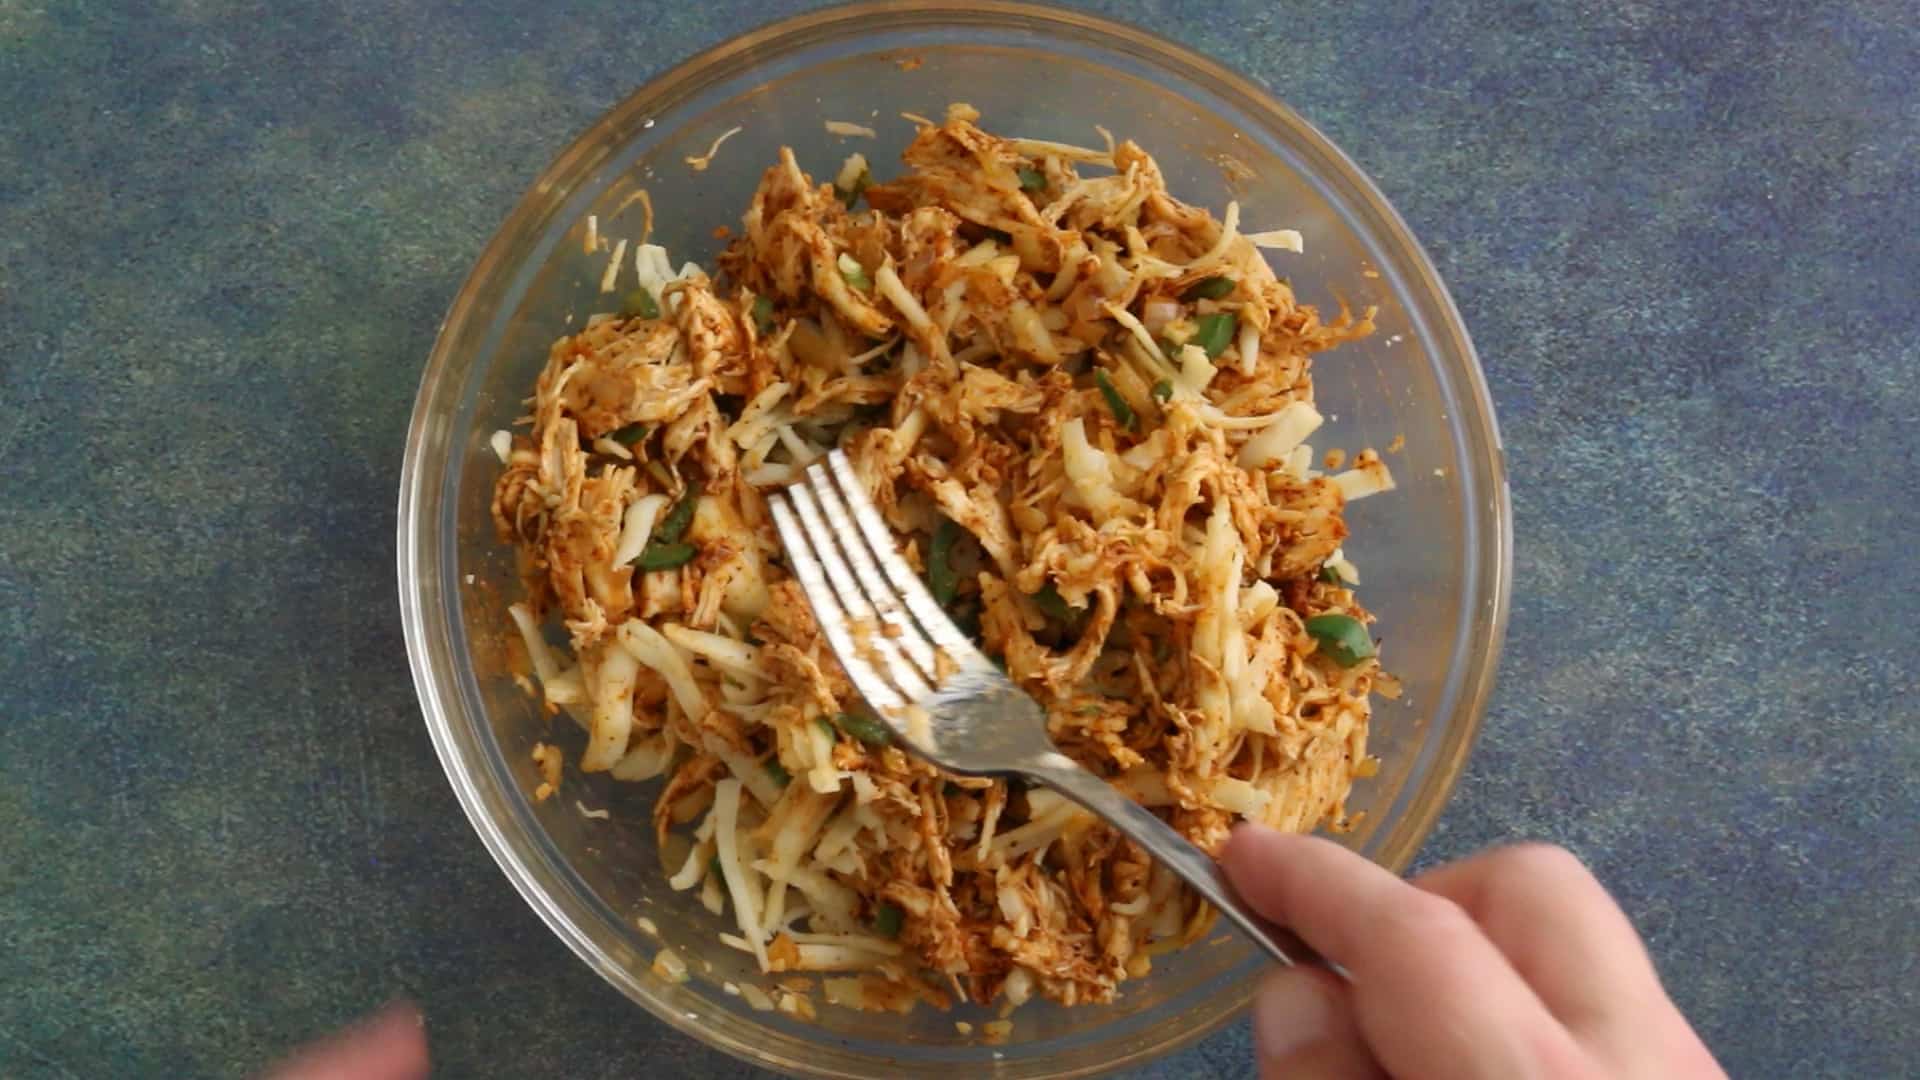 Mixing the seasoned shredded chicken with cheese